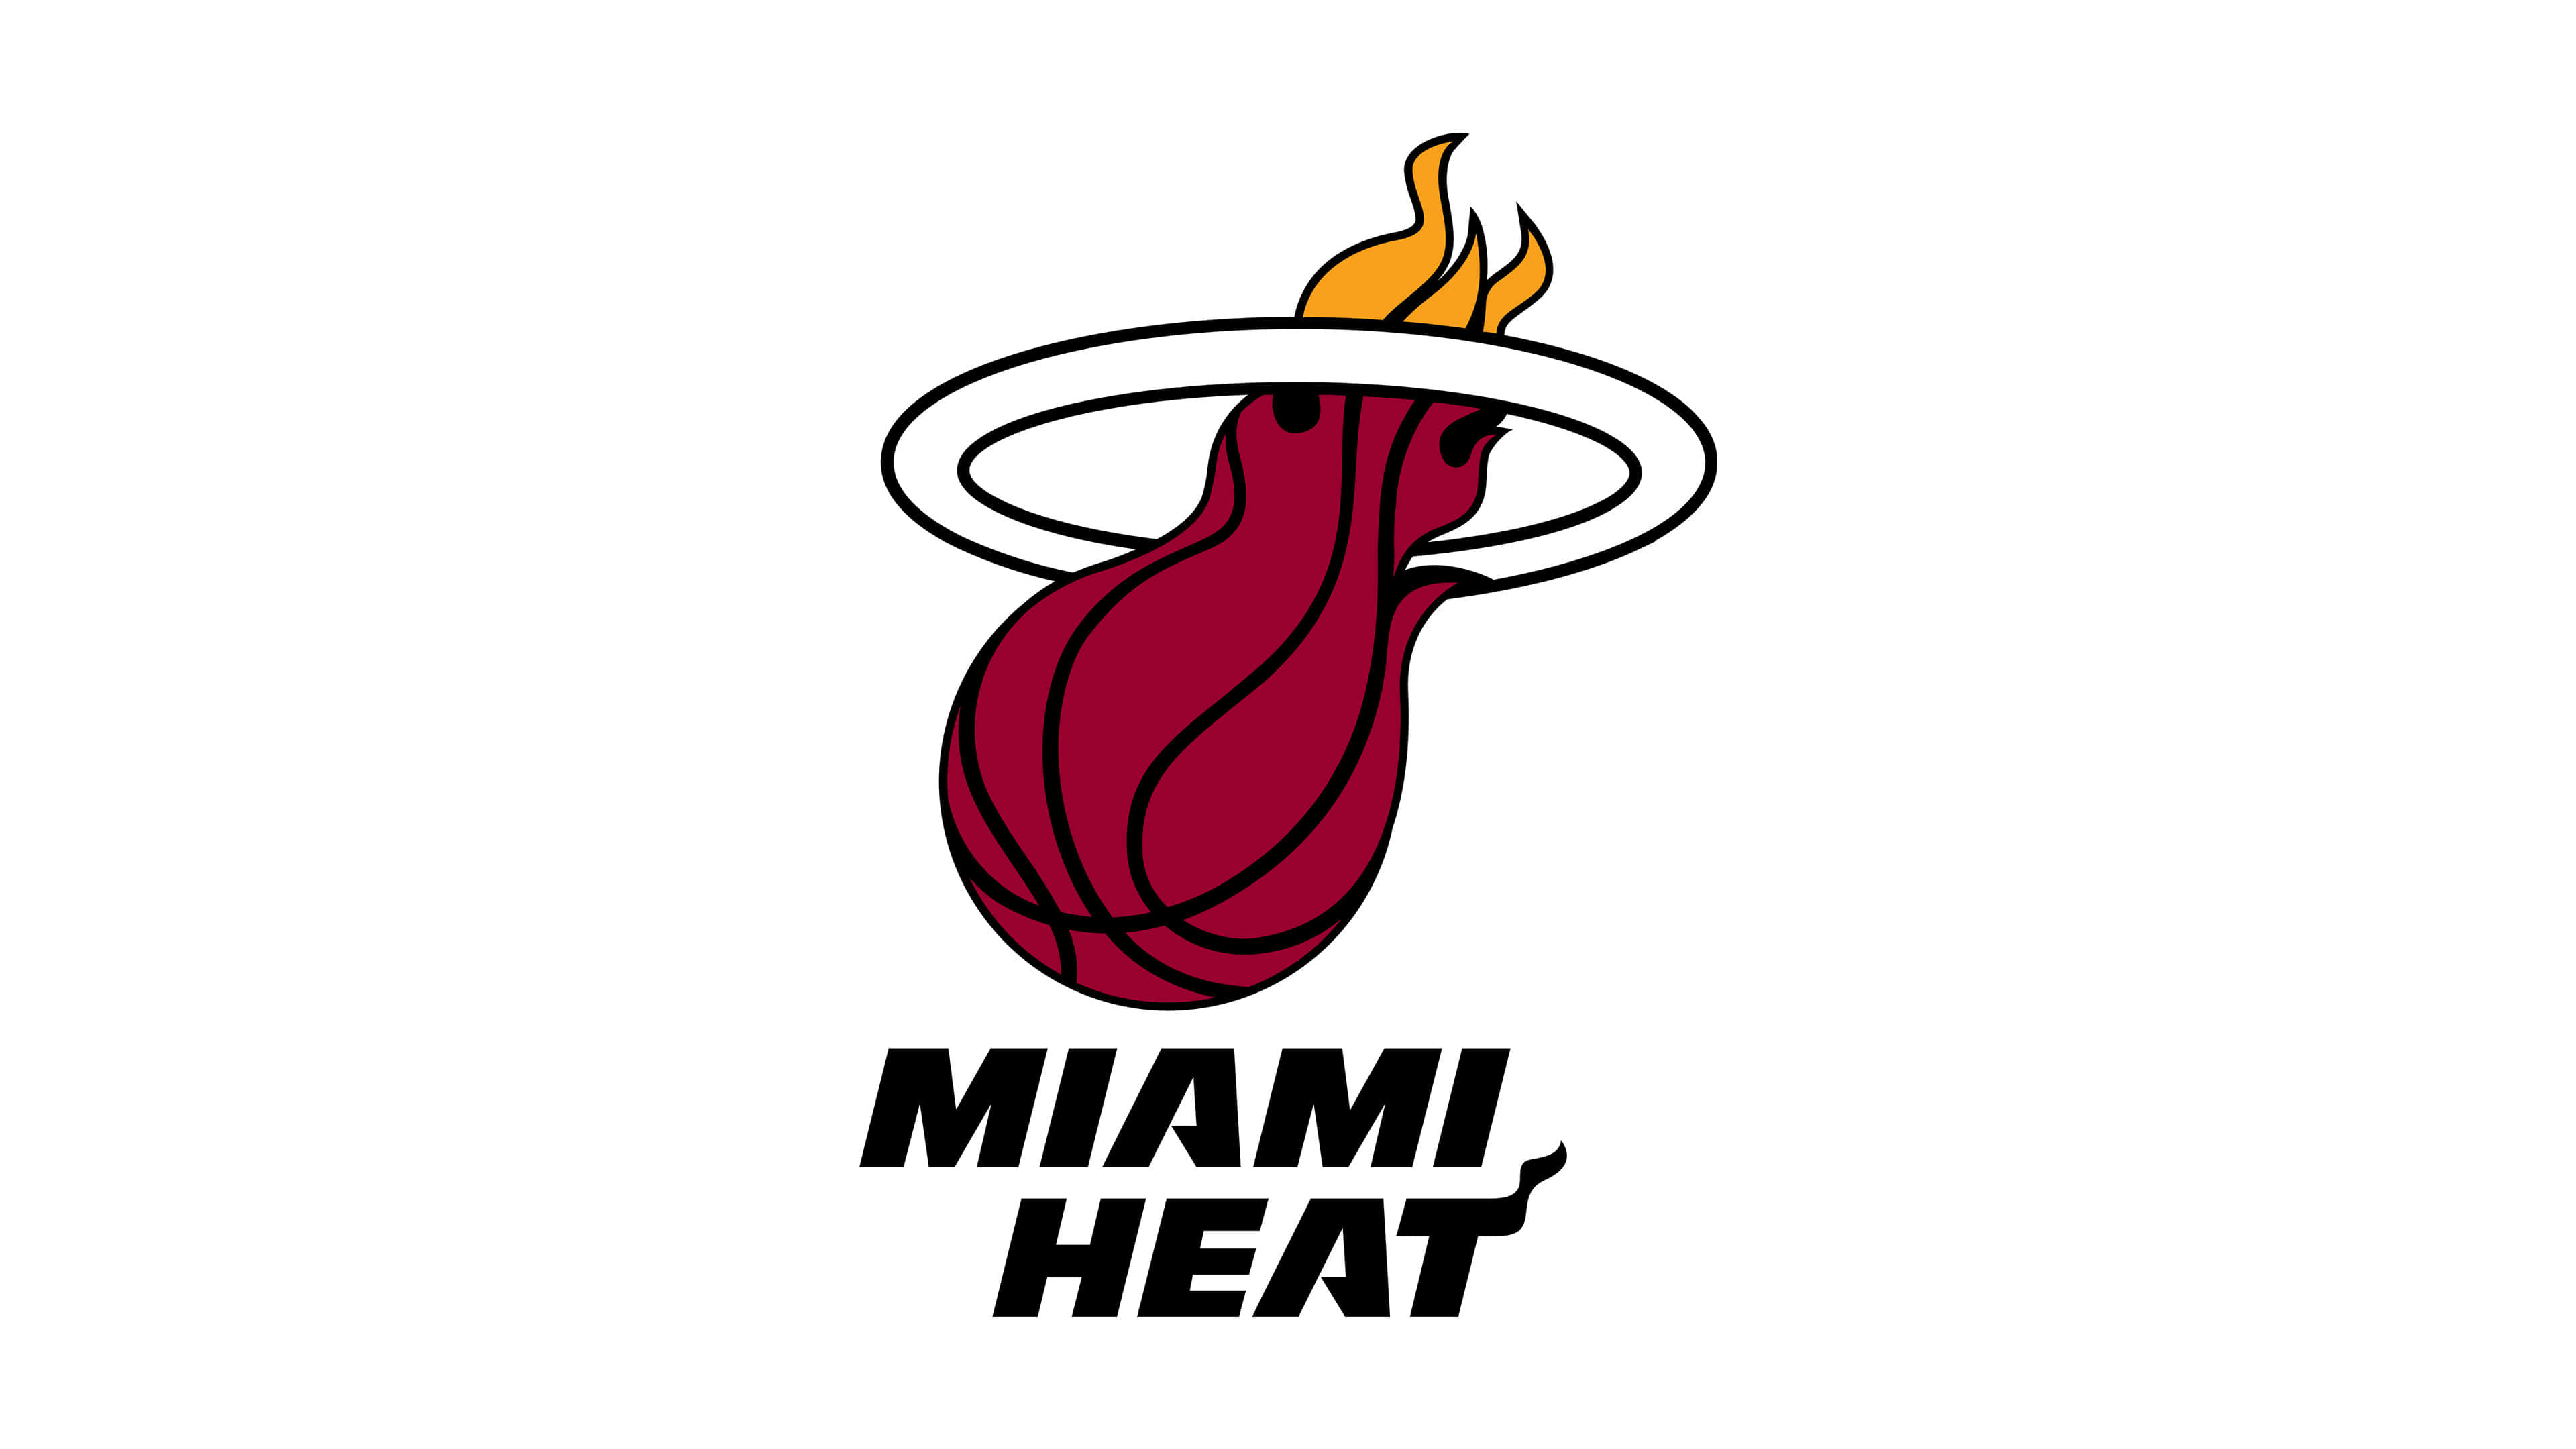 Miami Heat: The team compete in the NBA as a member of the Eastern Conference Southeast Division. 3840x2160 4K Wallpaper.